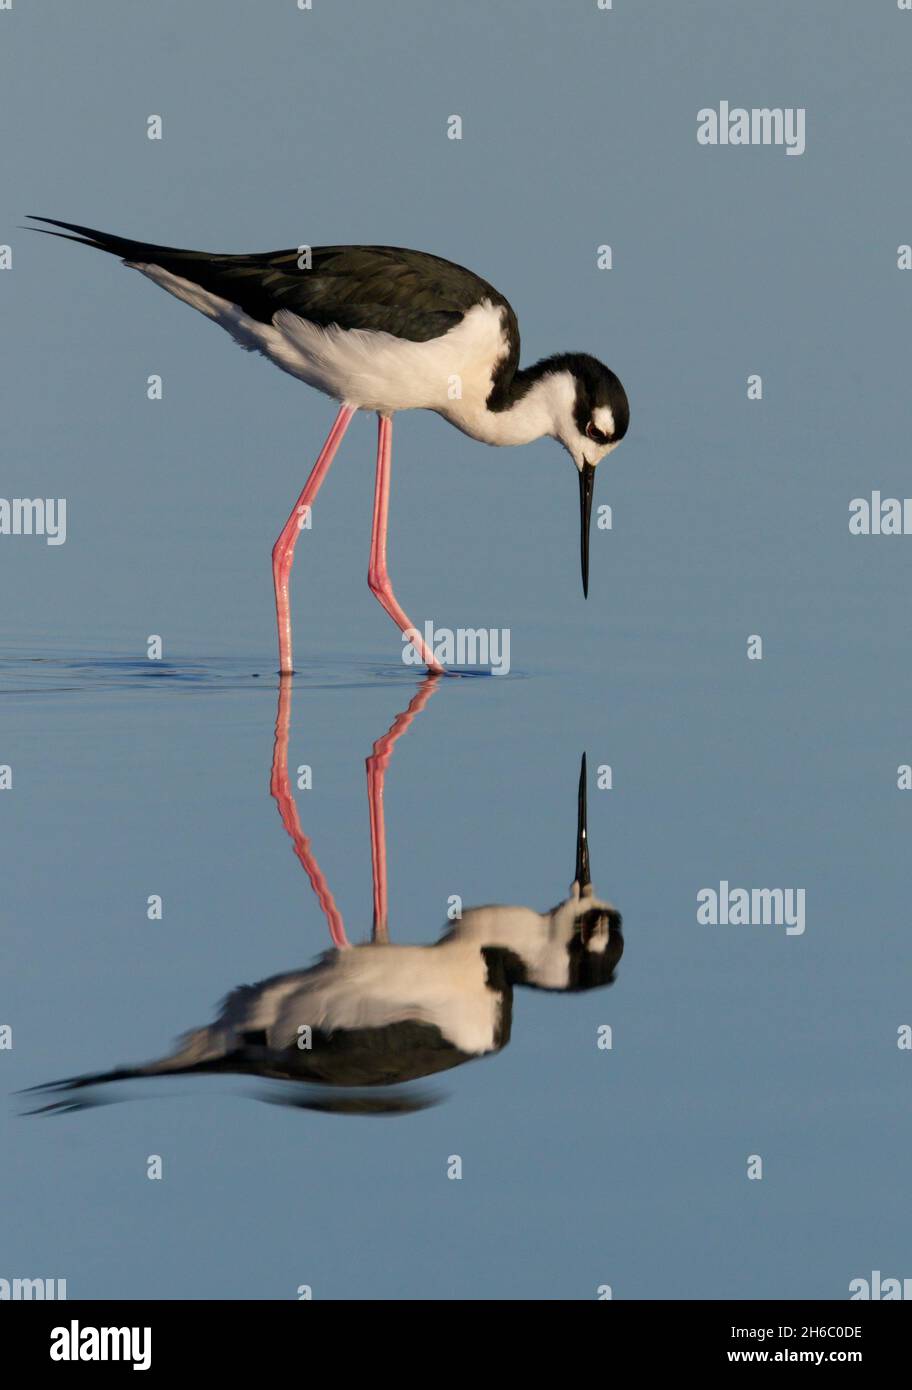 Black-necked stilt (Himantopus mexicanus) wading with reflection in quiet blue shallow water, Galveston, Texas, USA. Stock Photo